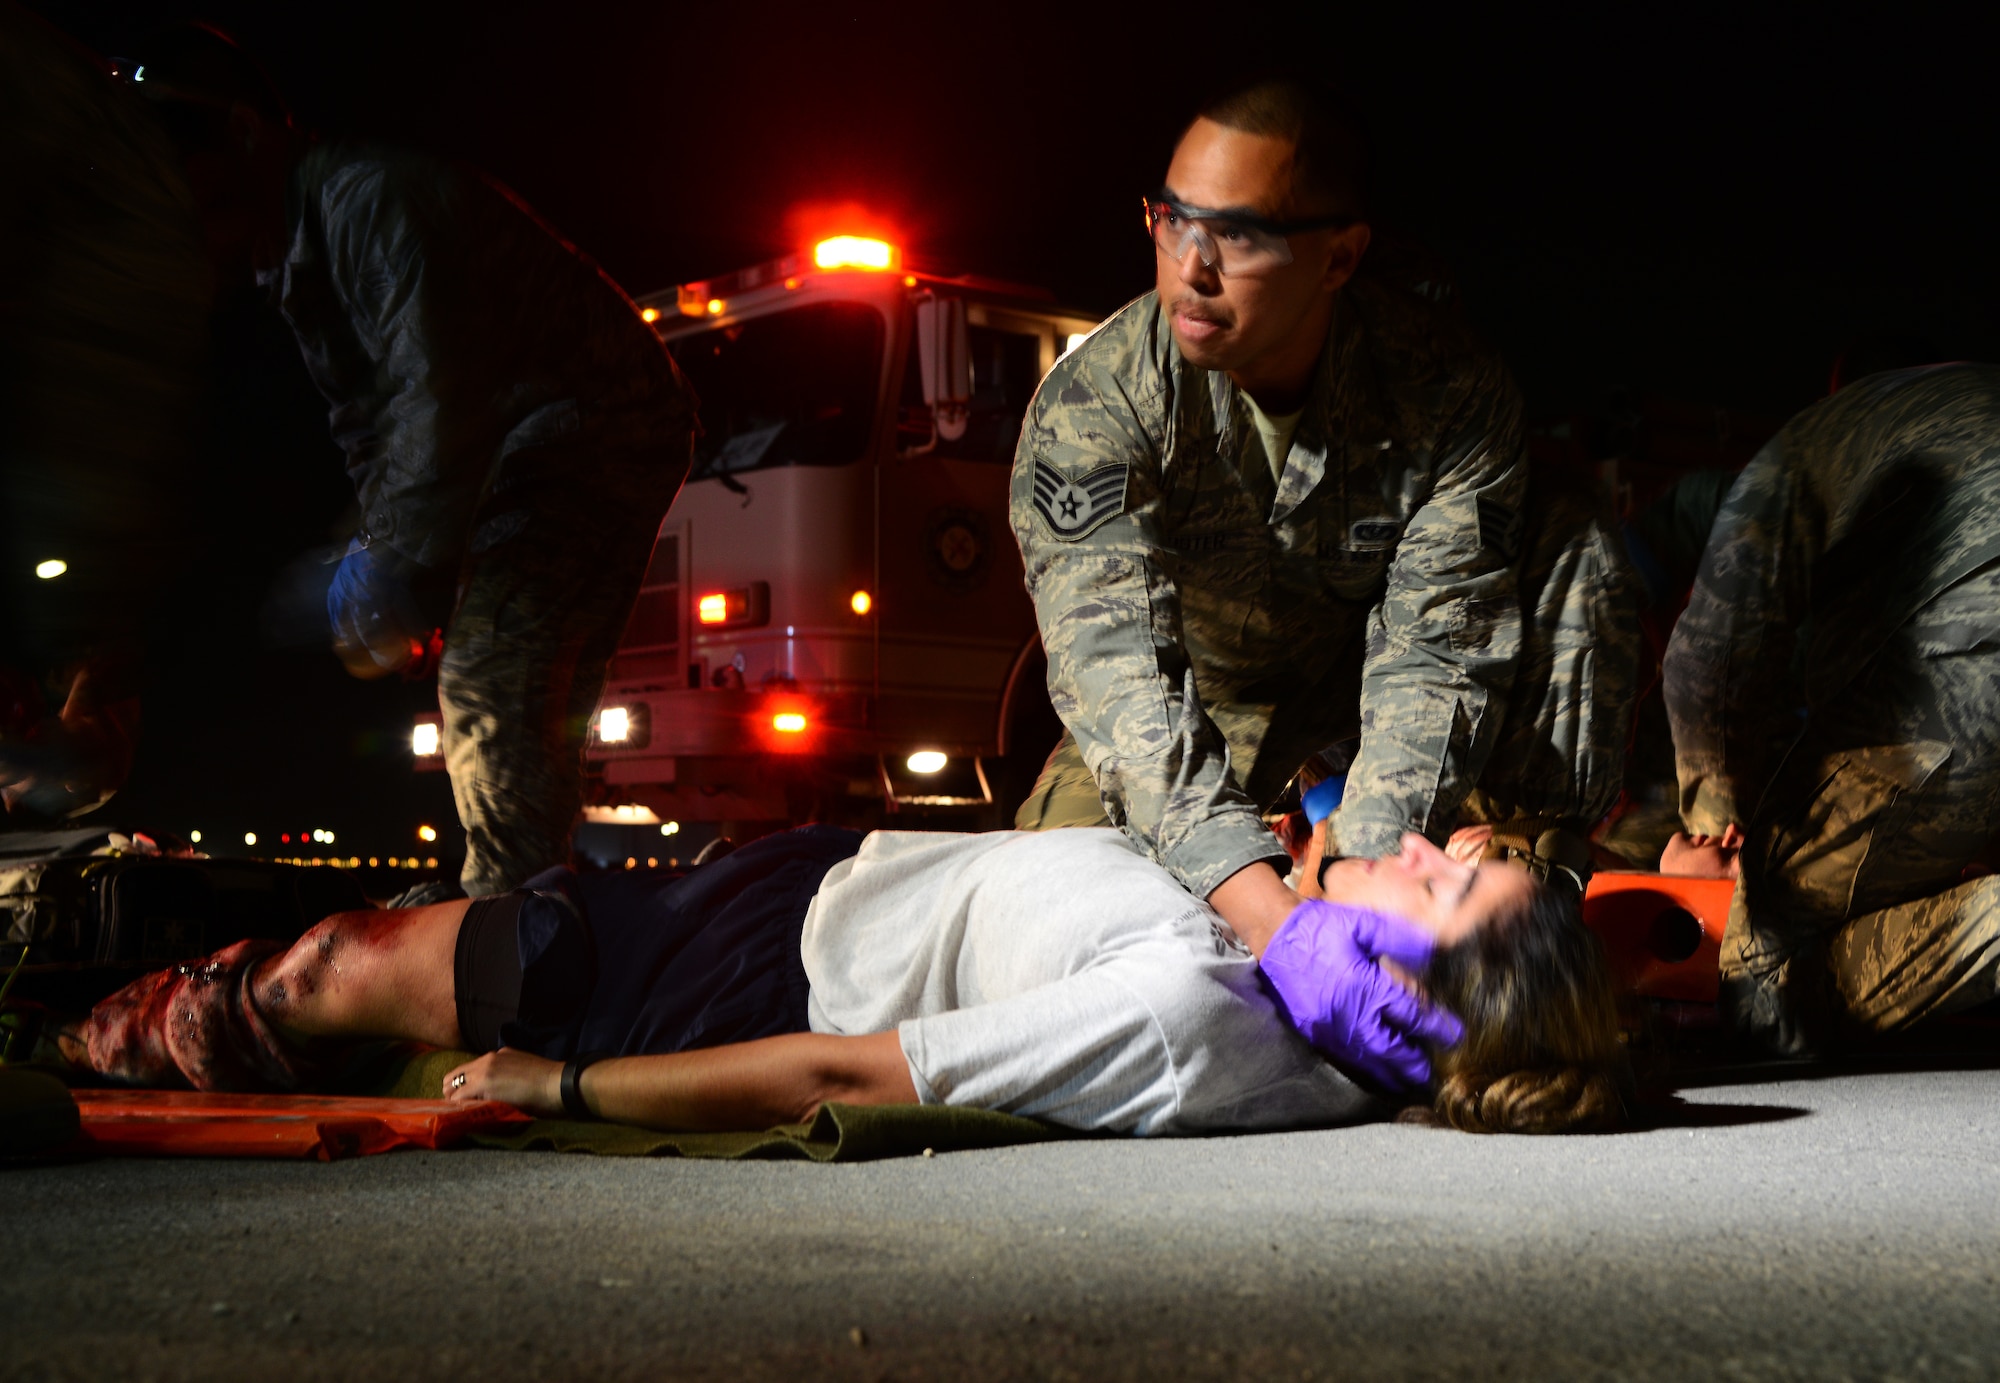 First responders tend to simulated victims of a vehicle accident during a mass casualty exercise Nov. 10, 2014, at Al Udeid Air Base, Qatar. Airmen from the 379th Expeditionary Medical Group and firefighters from the 379th Expeditionary Civil Engineer Squadron responded to the accident scene to assess the patients and transport them to the 379th EMDG for medical treatment. The training provided by these types of exercises keep Airmen ready to respond to real-world scenarios at a moment’s notice. (U.S. Air Force photo by Senior Airman Kia Atkins)